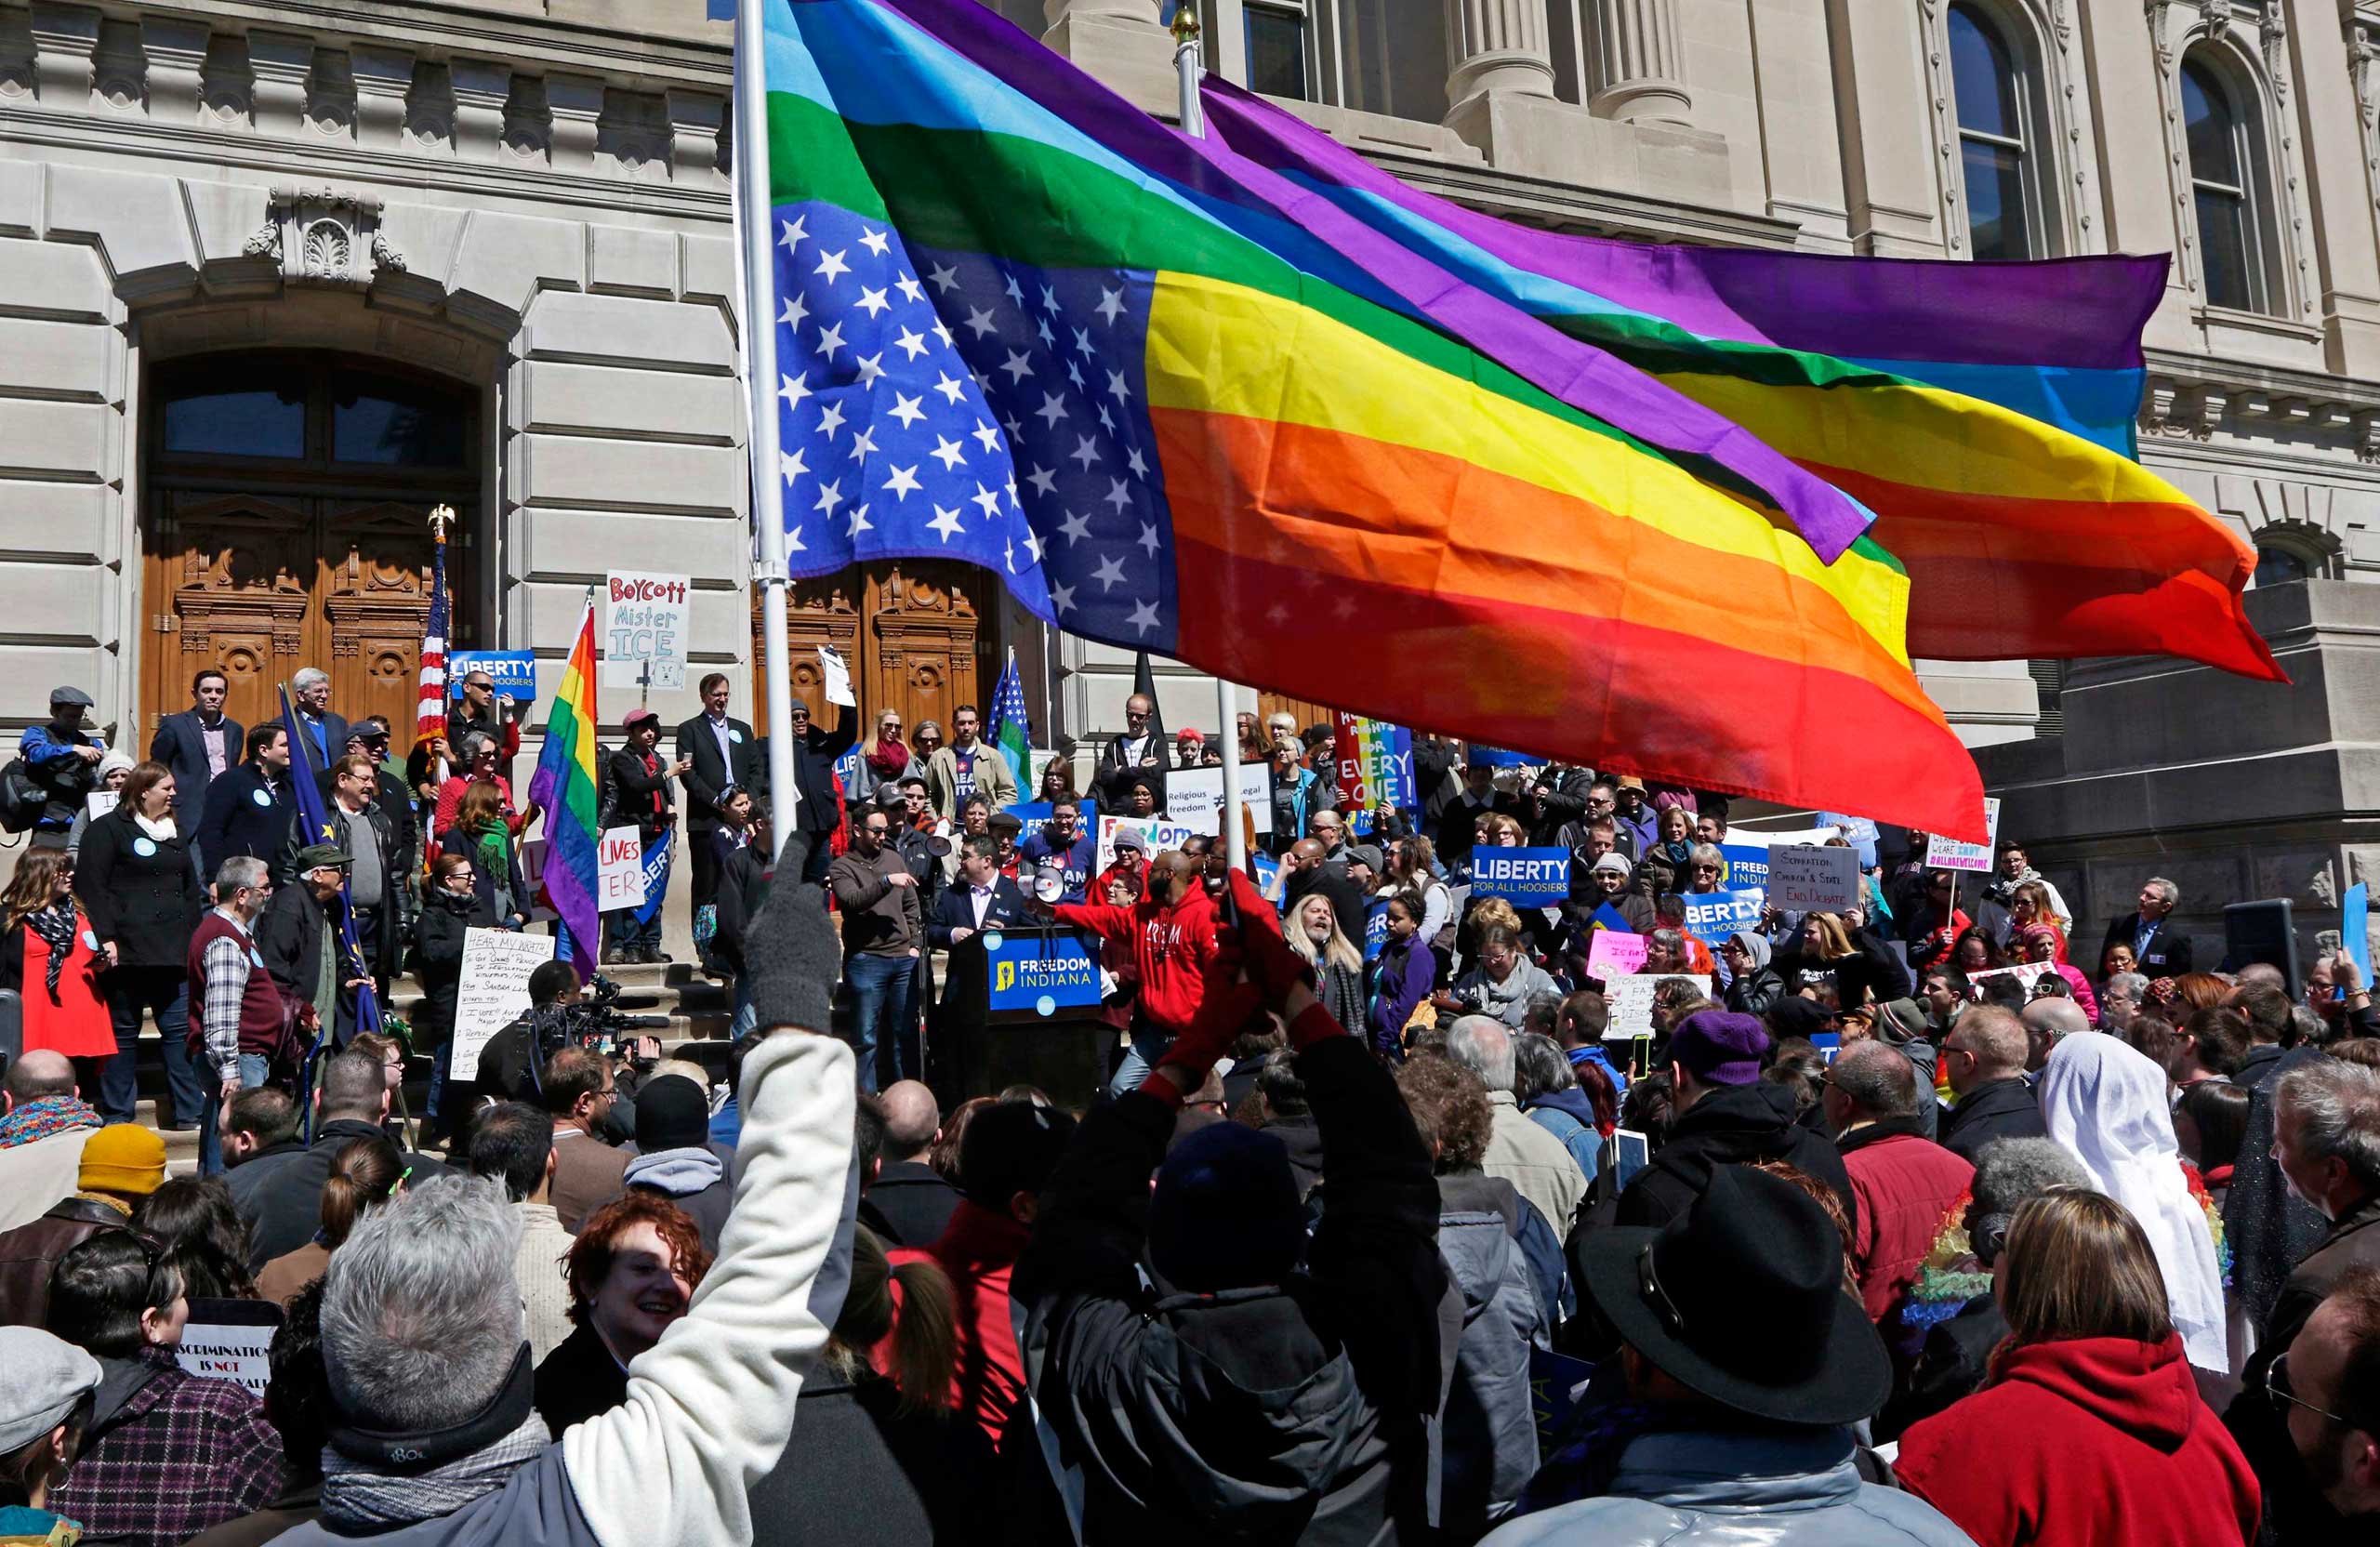 Demonstrators gather to protest a controversial religious freedom bill recently signed by Governor Mike Pence, during a rally at Monument Circle in Indianapolis on March 28, 2015. (Nate Chute—Reuters)